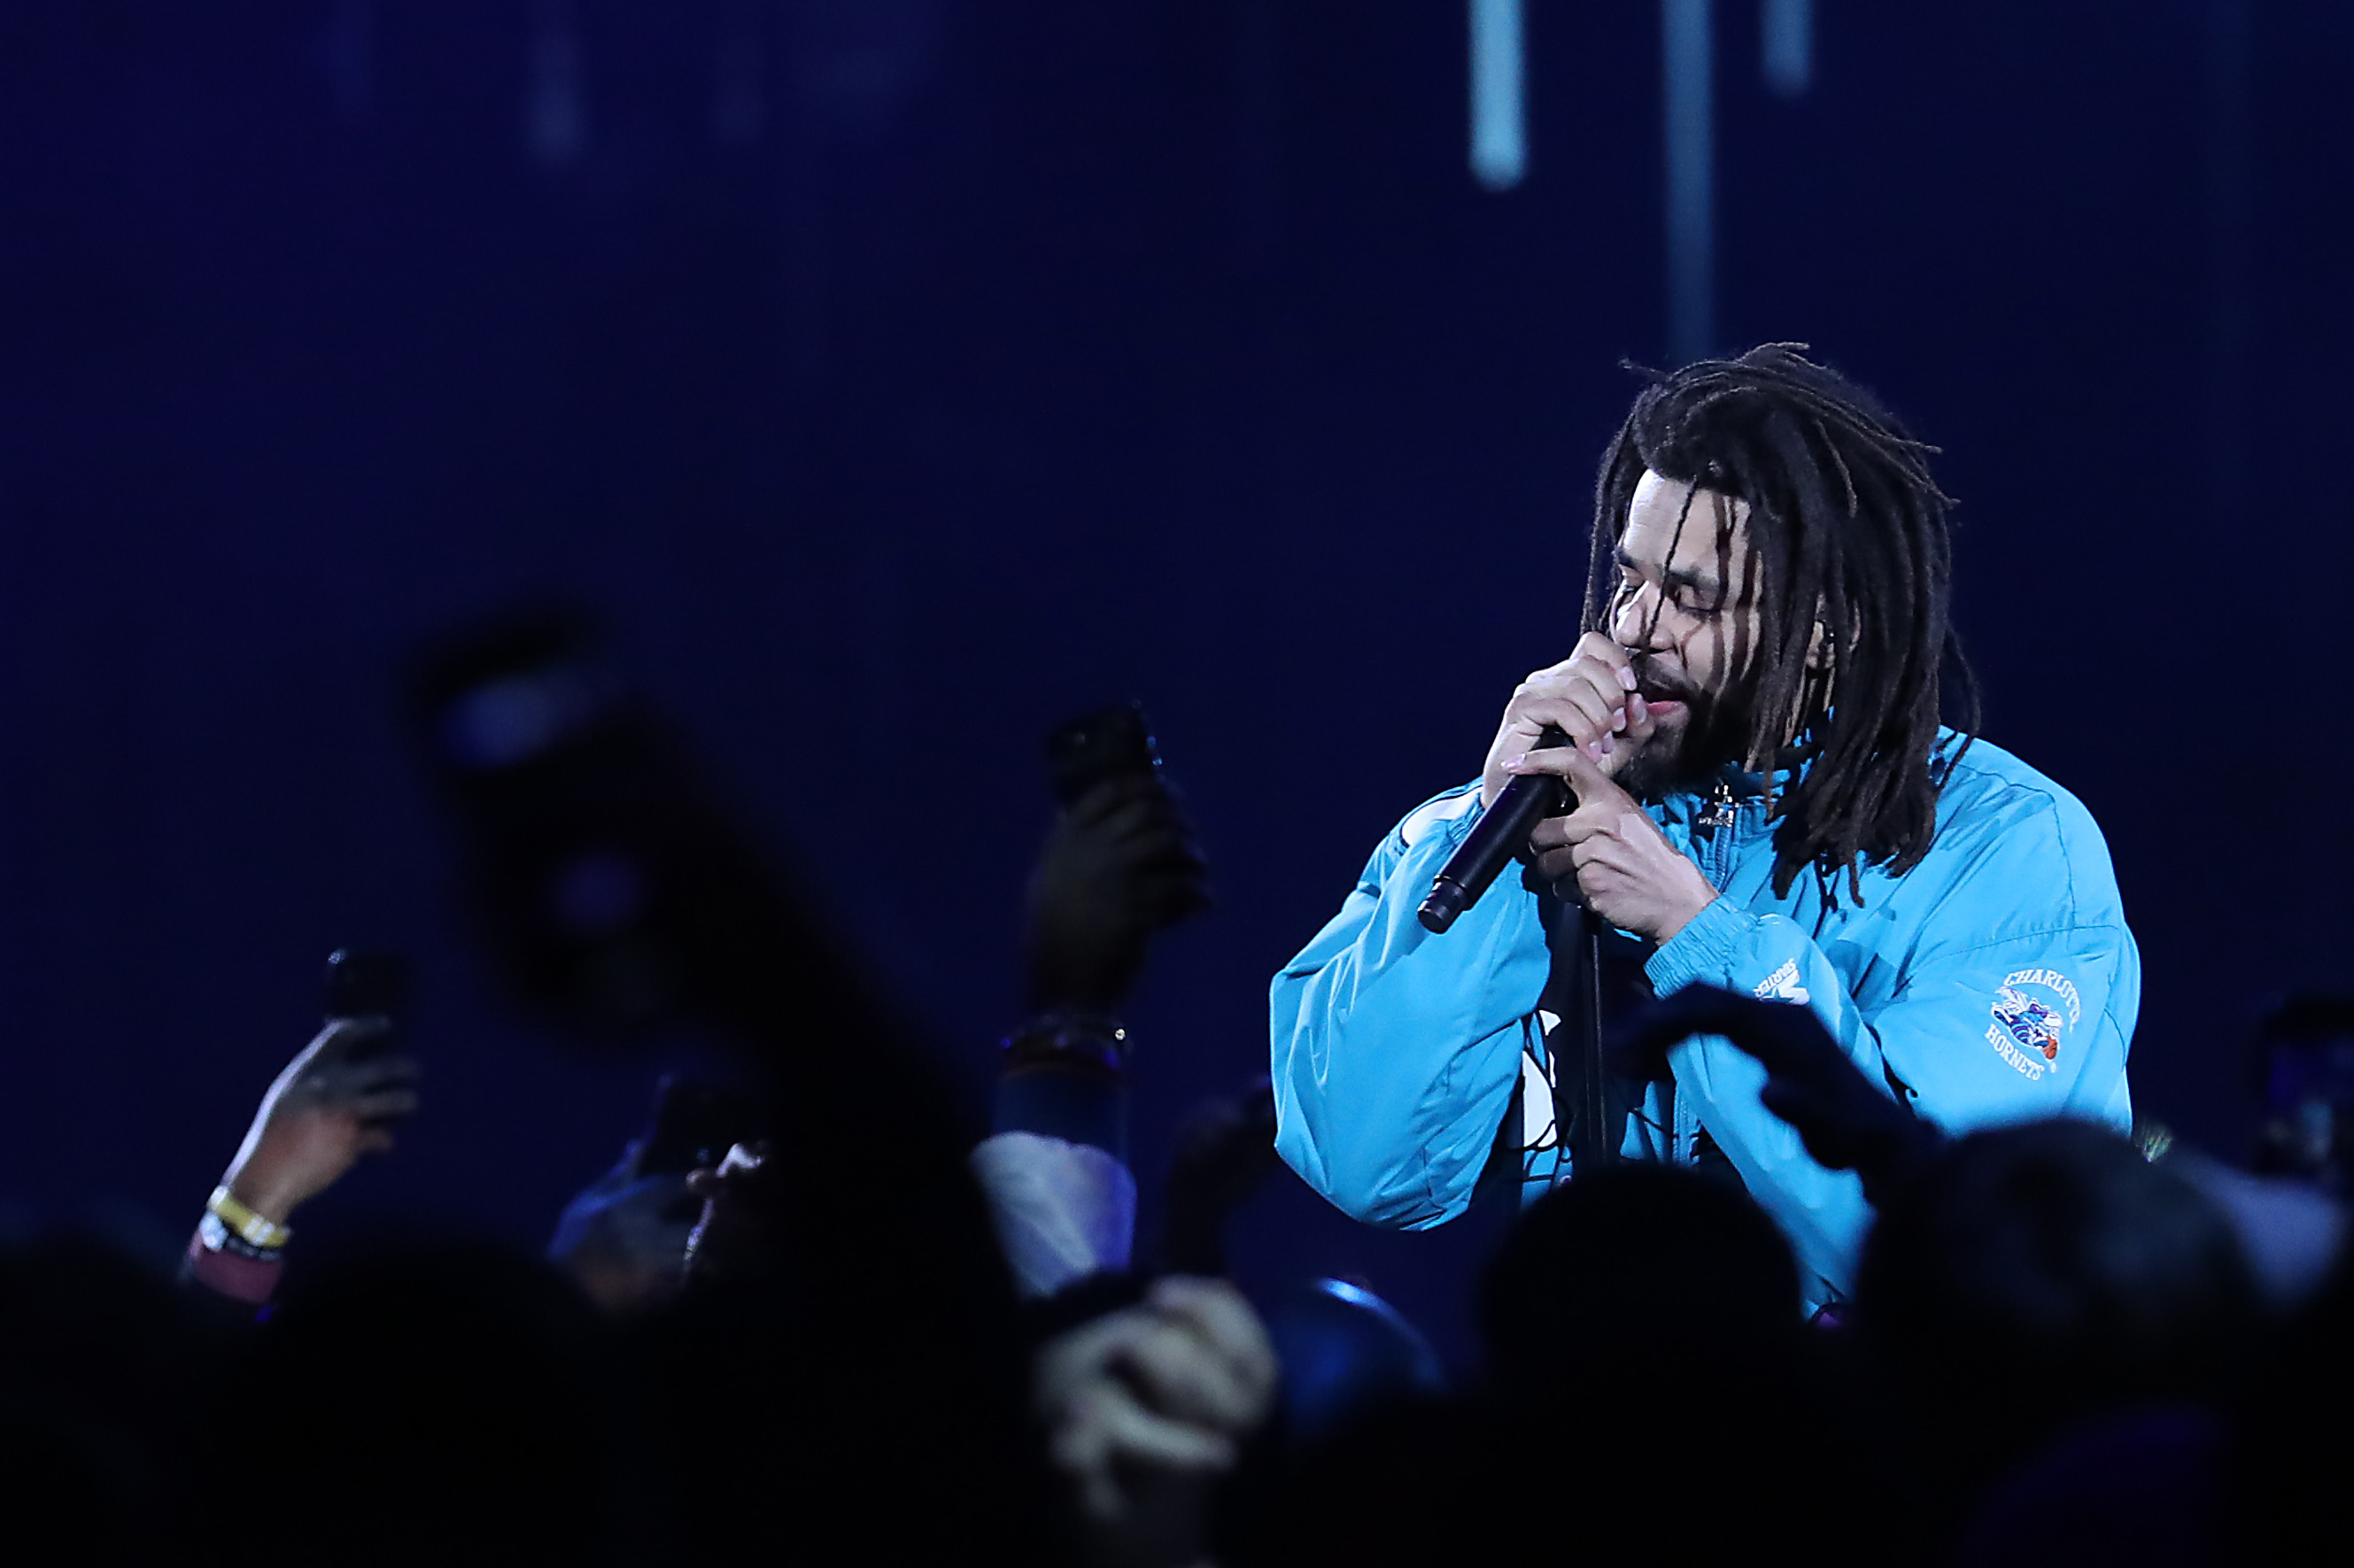 21 SAVAGE AND J. COLE WIN GRAMMY FOR THEIR COLLAB, A LOT